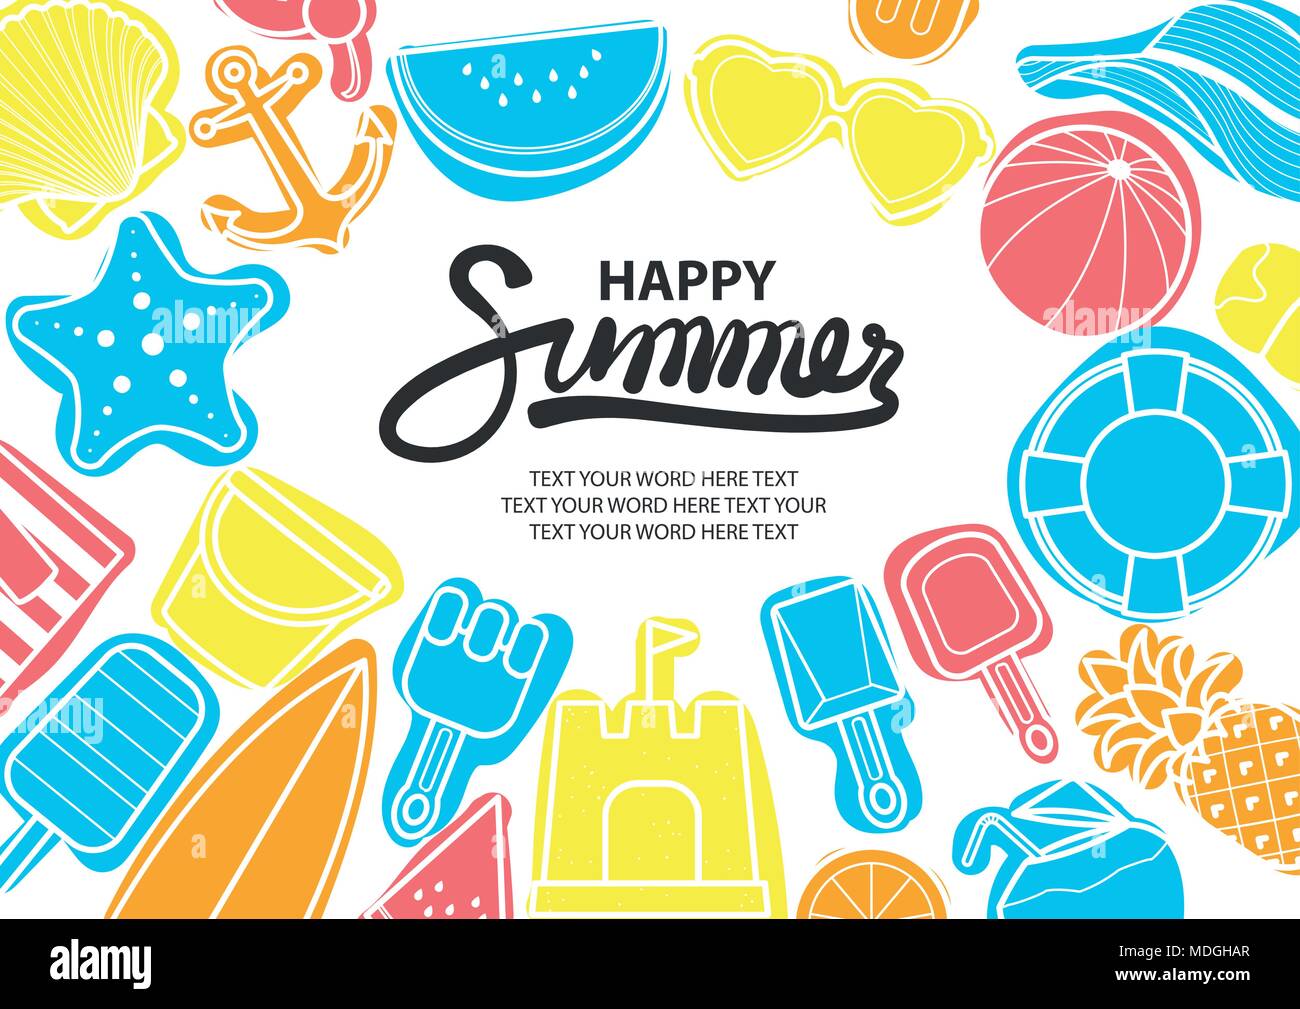 Background design vector illustration for Summer with space for text. Beach stuff in white outline and colorful plane surround gray text at the middle Stock Vector